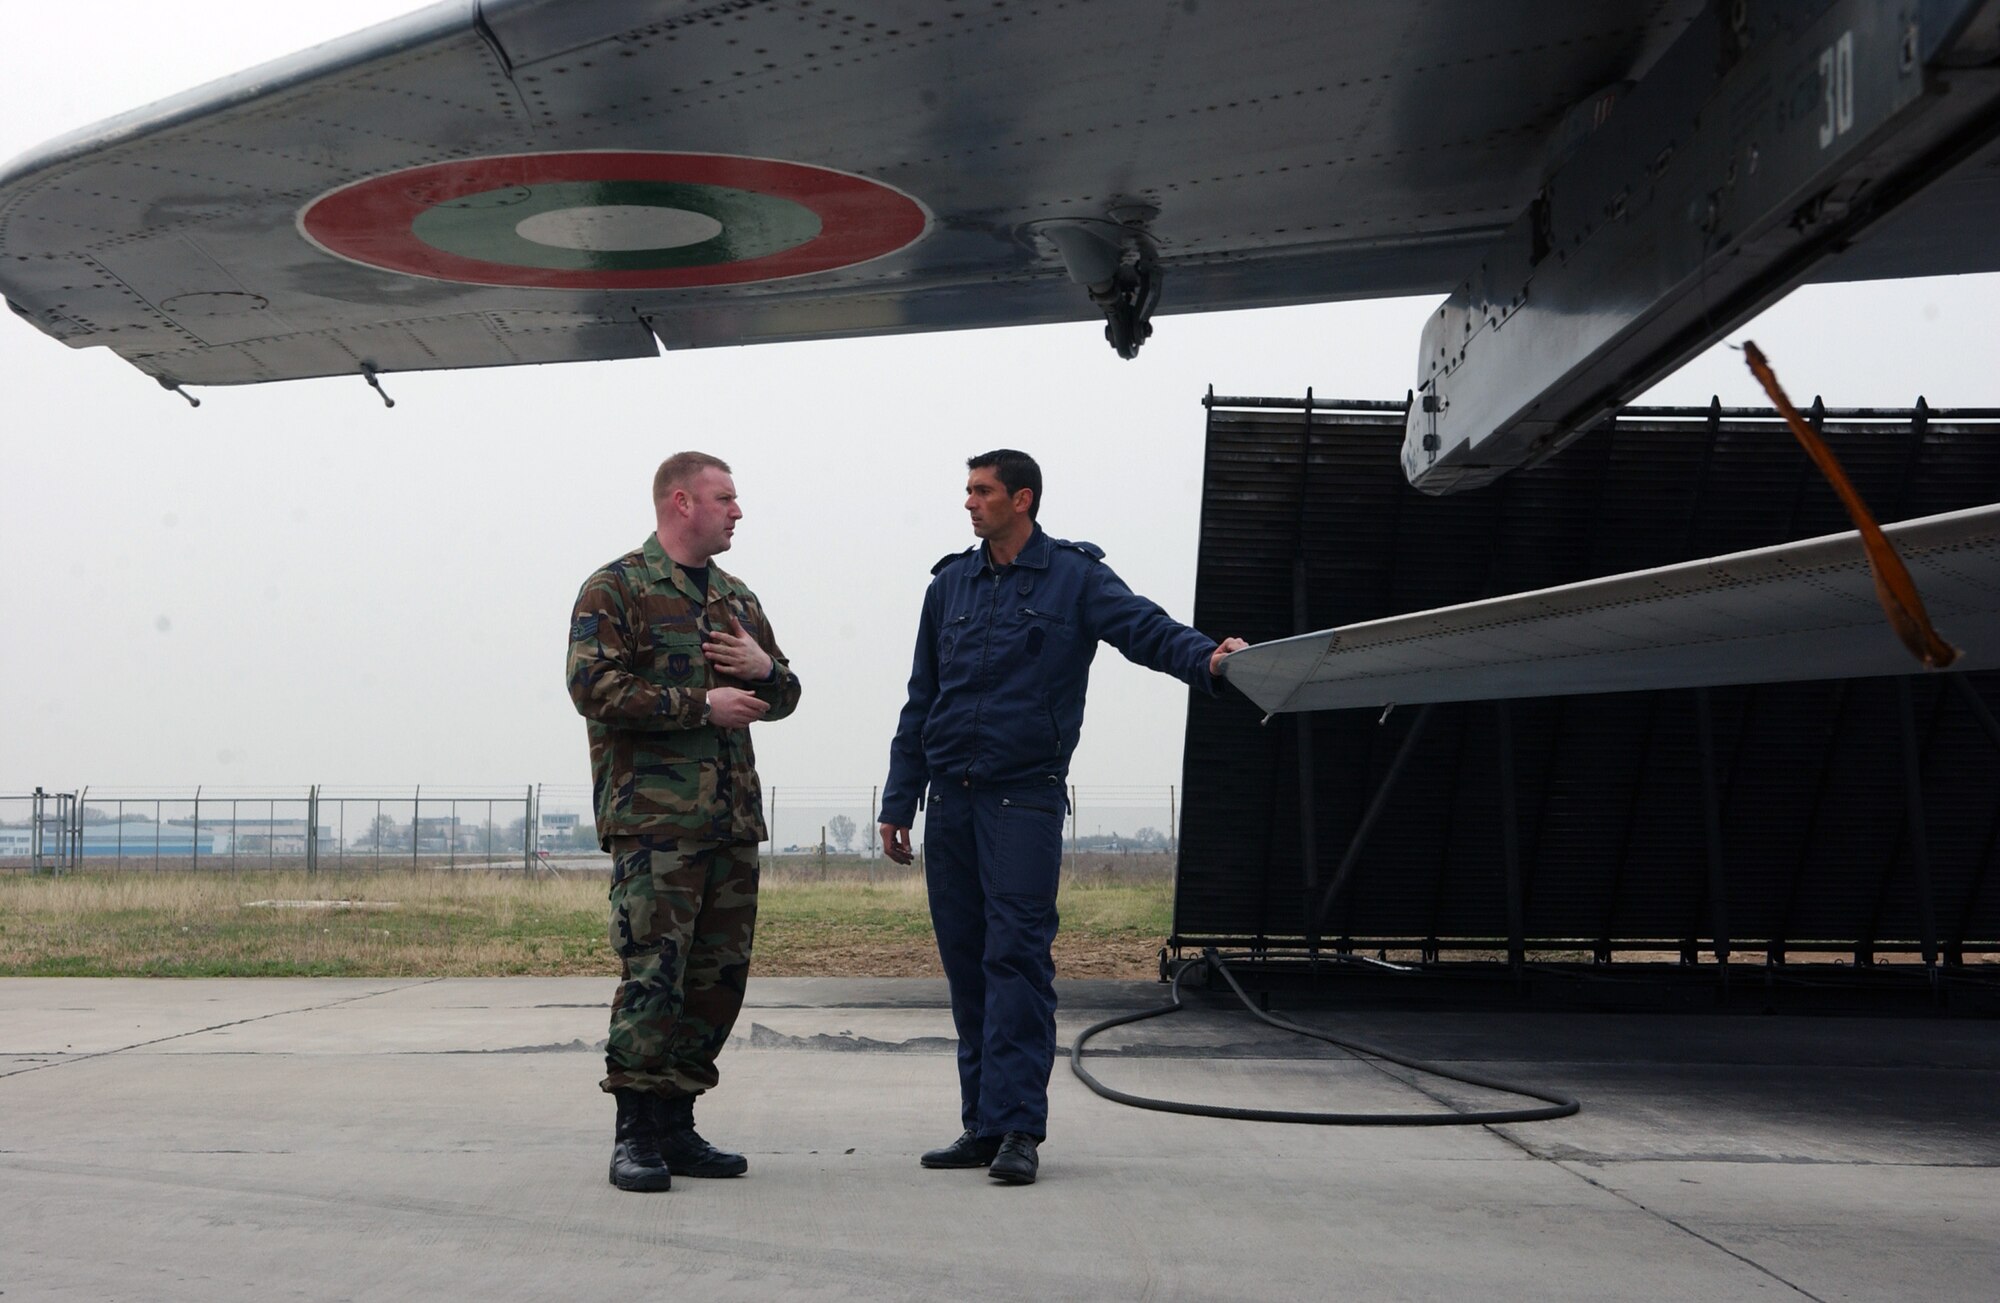 GRAF IGNATIEVO AIR BASE, Bulgaria -- Staff Sgt. Robert Jackson and Bulgarian air Force Master Sgt. Vladimir Kolev, dedicated crew chiefs for F-15 and MiG-29 aircraft respectively, discuss the differences and similarities in maintainance procedures for their planes. As part of a familiarization program, a few Airmen from each country's service were allowed to tour and learn about each other's aircraft. Sergeant Jackson is deployed here as part of Operation Noble Endeavor.  (U.S. Air Force photo by Tech. Sgt. Jill LaVoie)